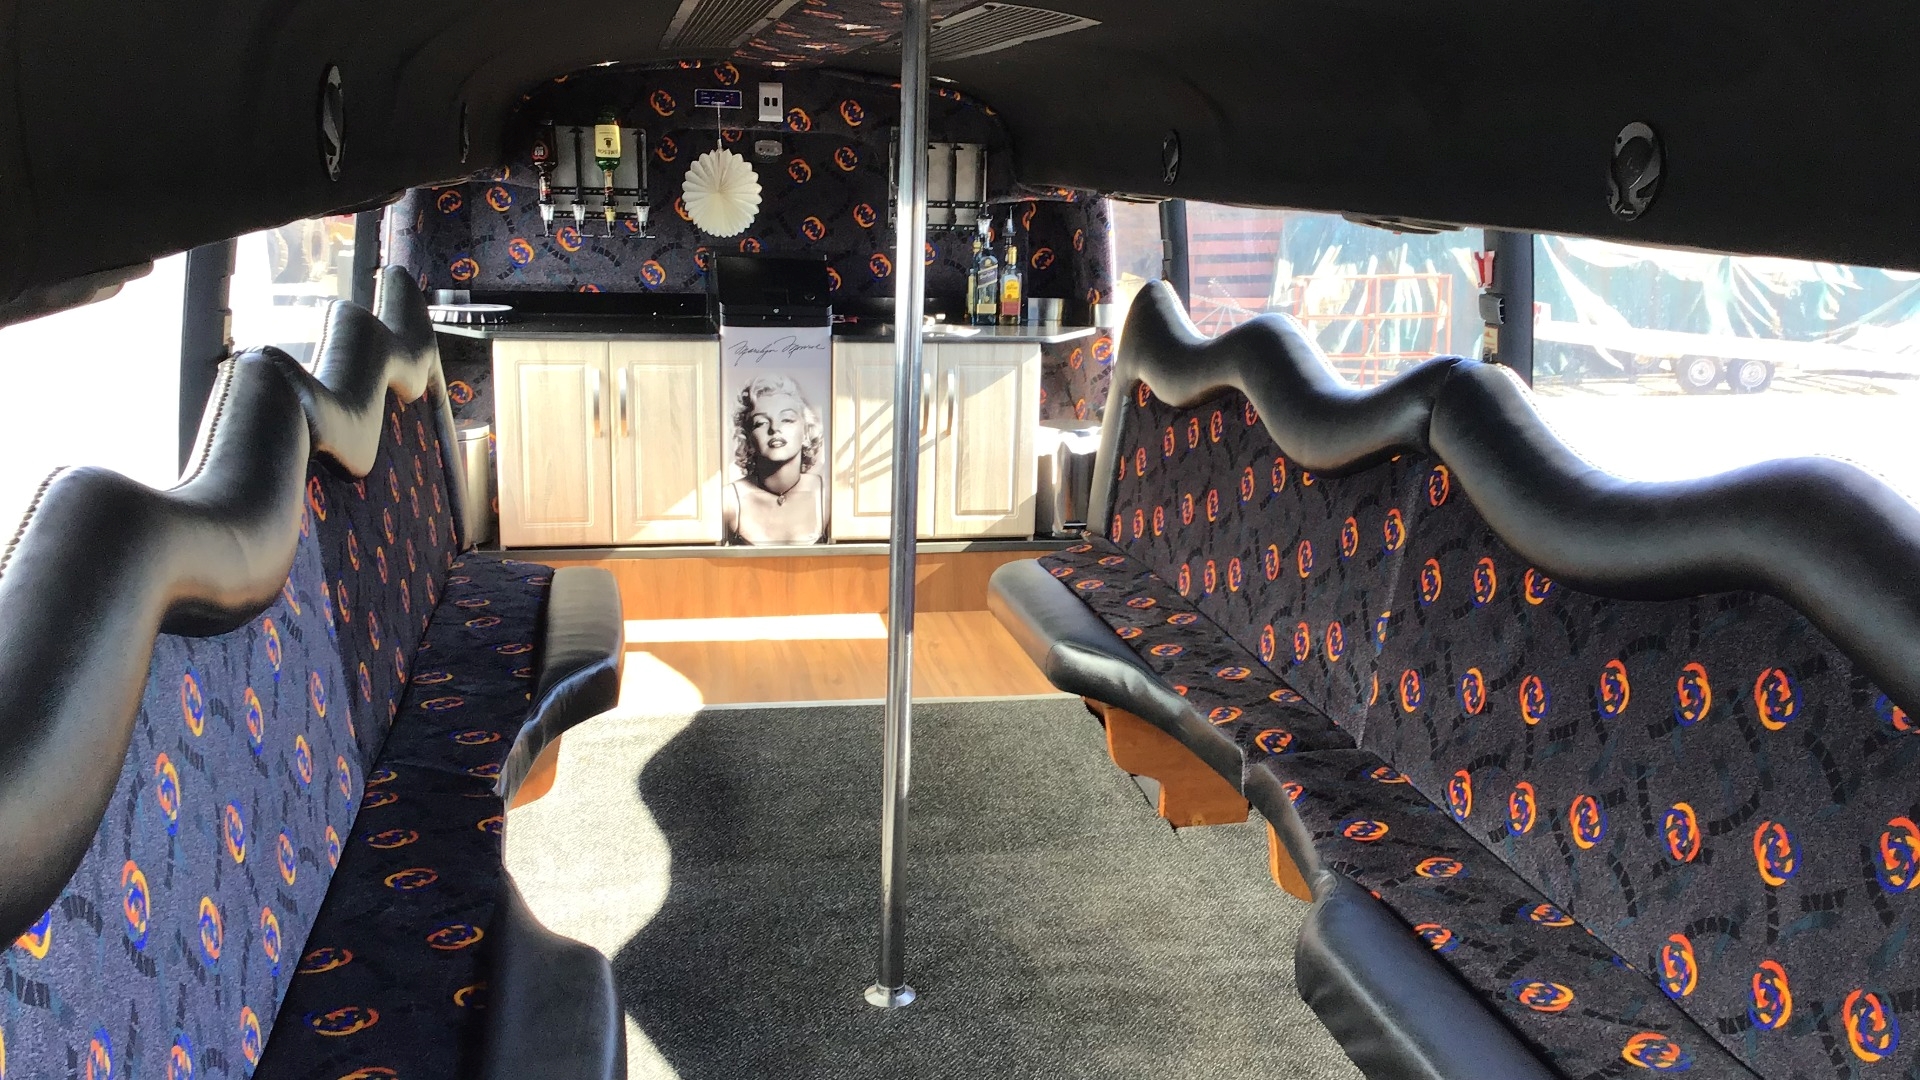 Scania Buses 2006 Scania Party Bus 2006 for sale by Nationwide Trucks | Truck & Trailer Marketplace